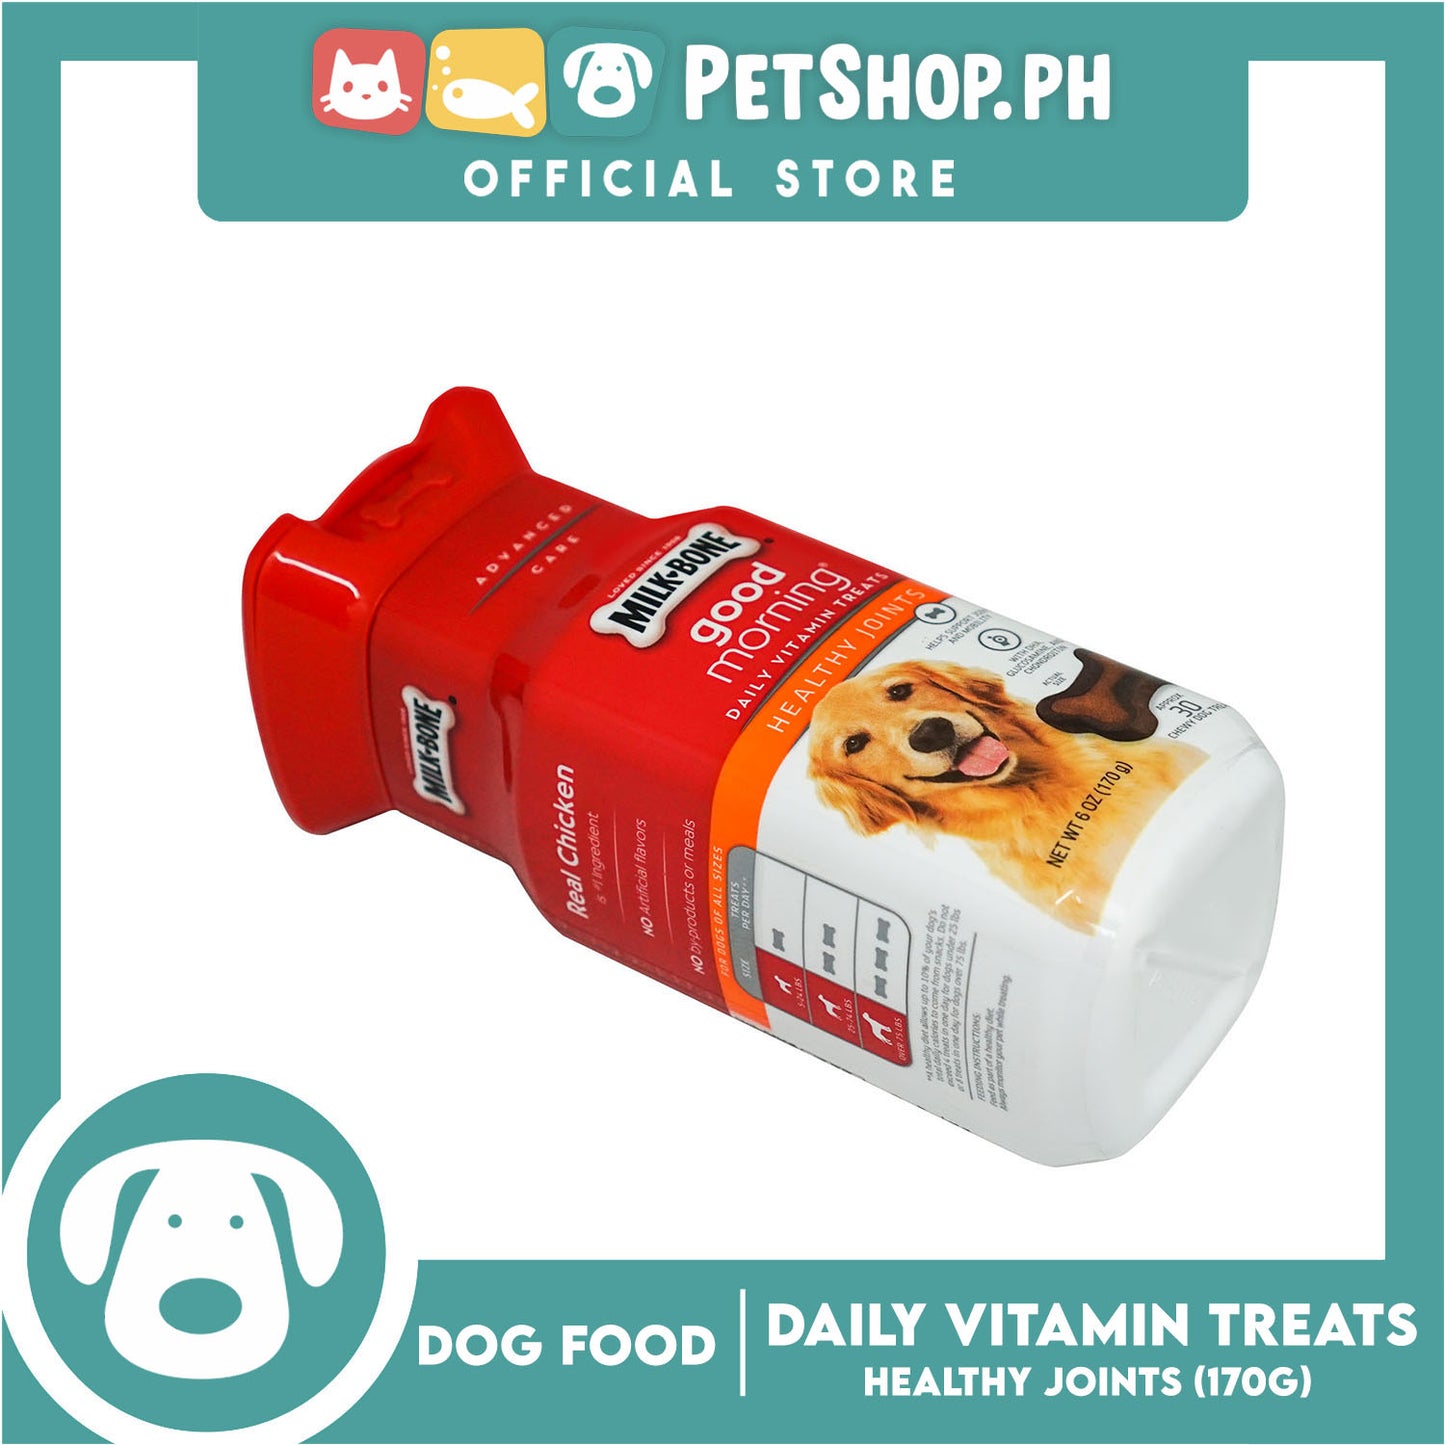 Milk-Bone Good Morning Healthy Joints Daily Vitamin Treats for Dogs 170g